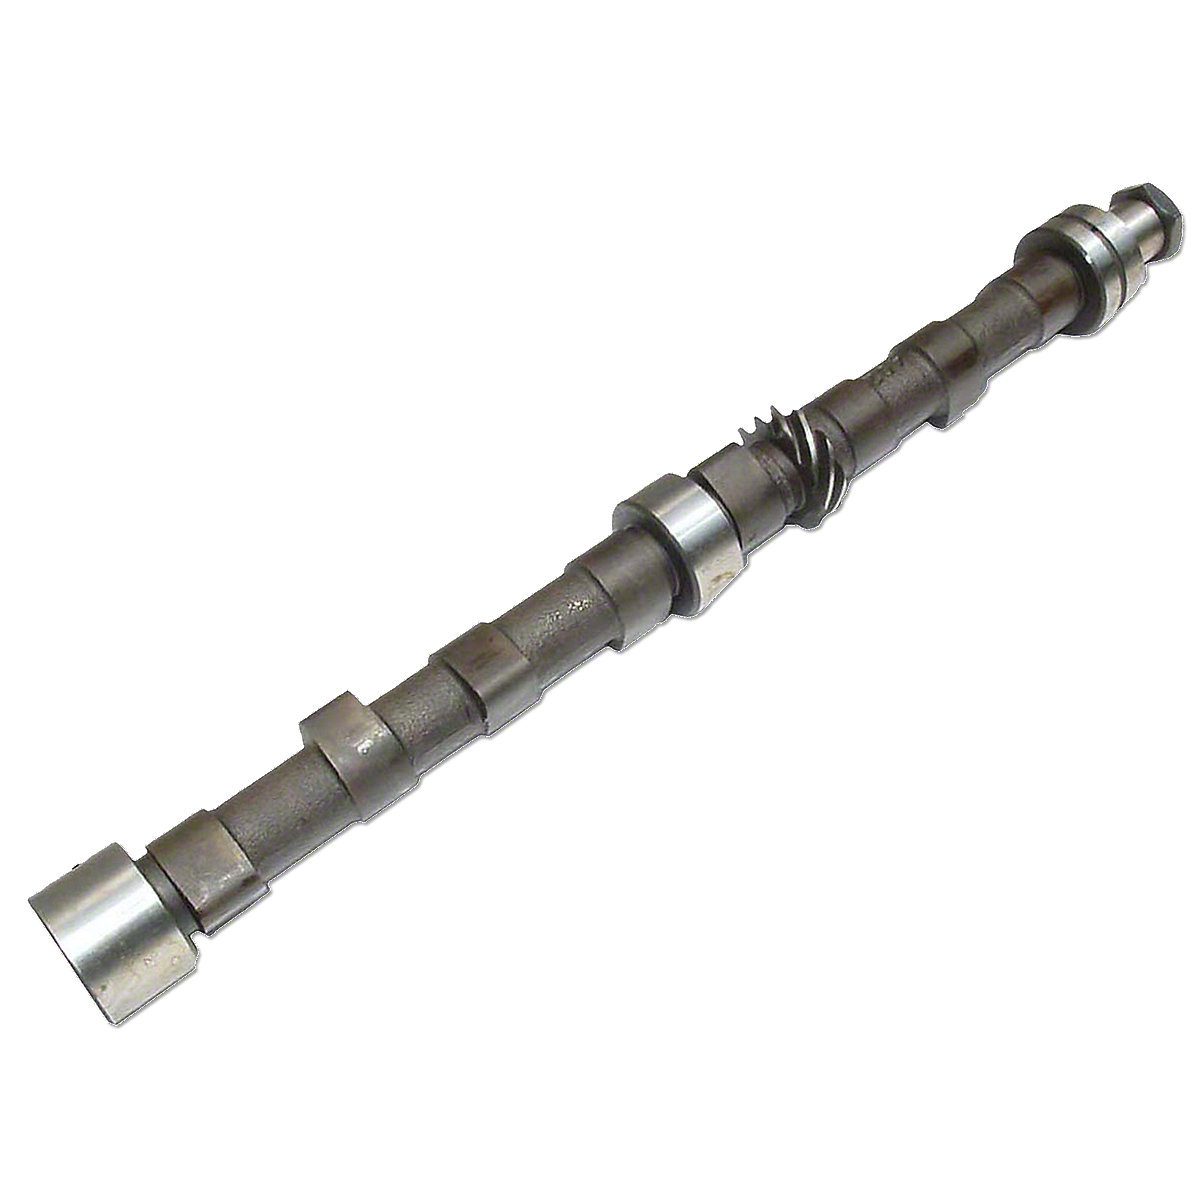 Camshaft With Nut For Massey Ferguson: TE20, TO20, TO30, TO35, 202, 204, 35, 40, 50, Massey Harris: 50.